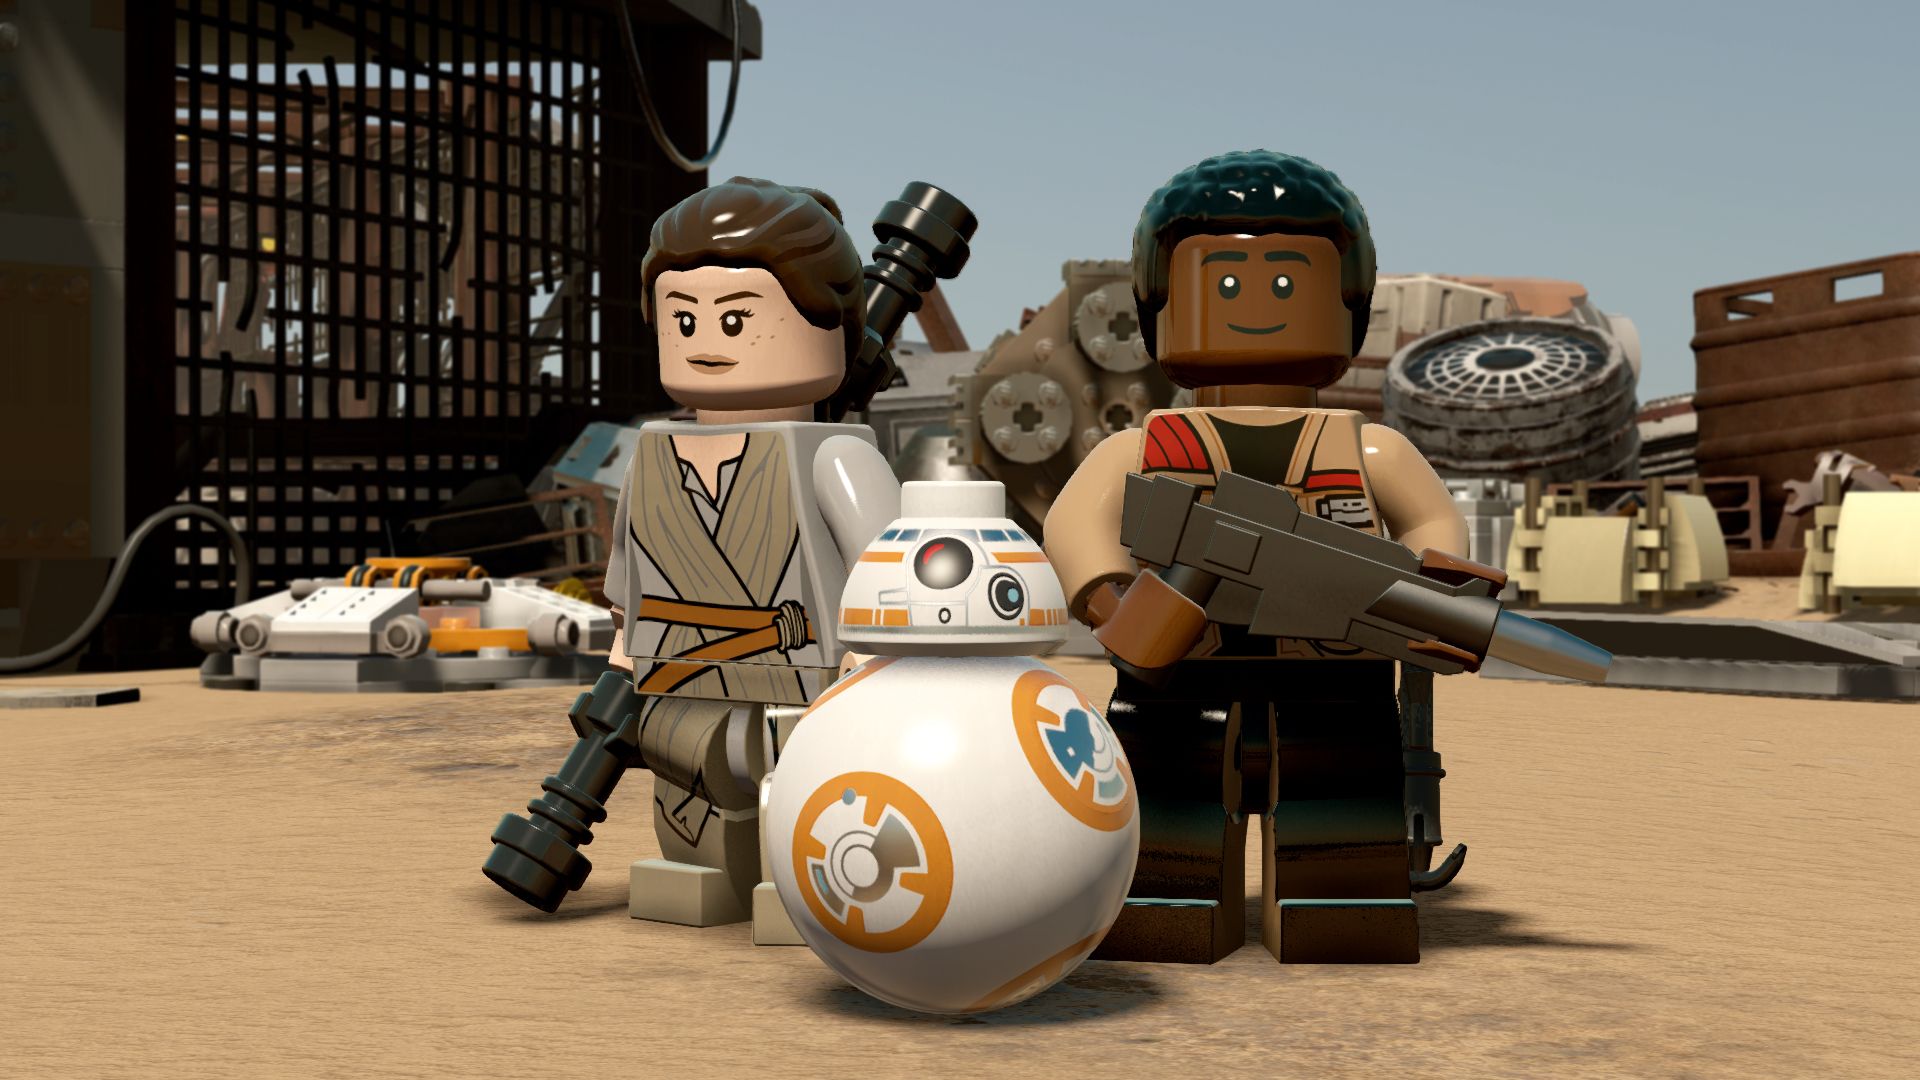 lego star wars the force awakens review image 1